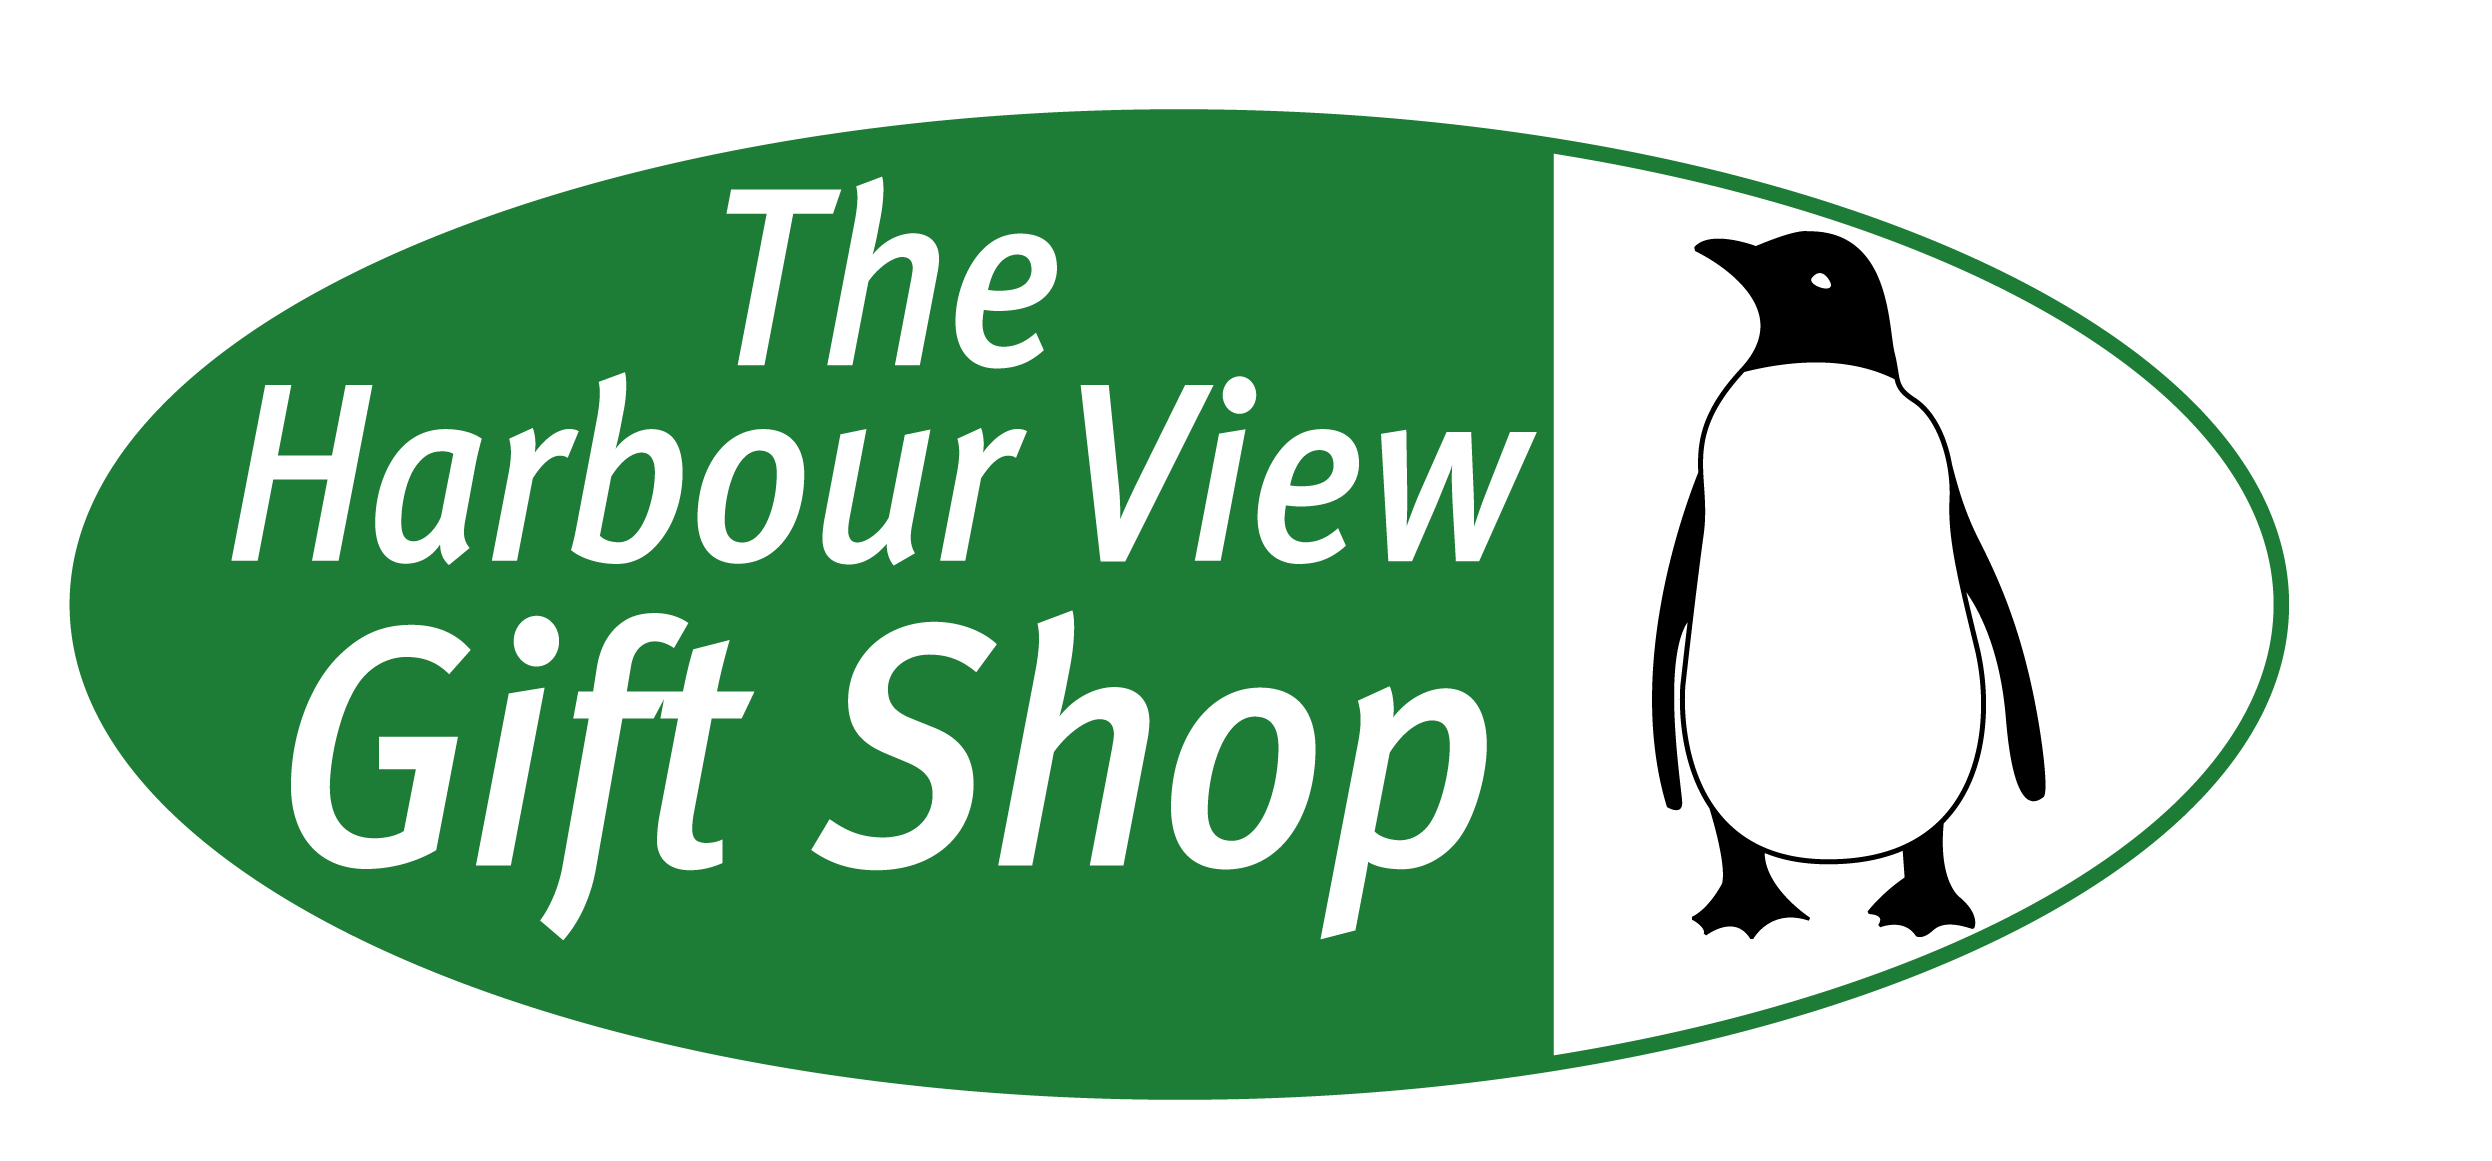 The Harbour View Gift Shop